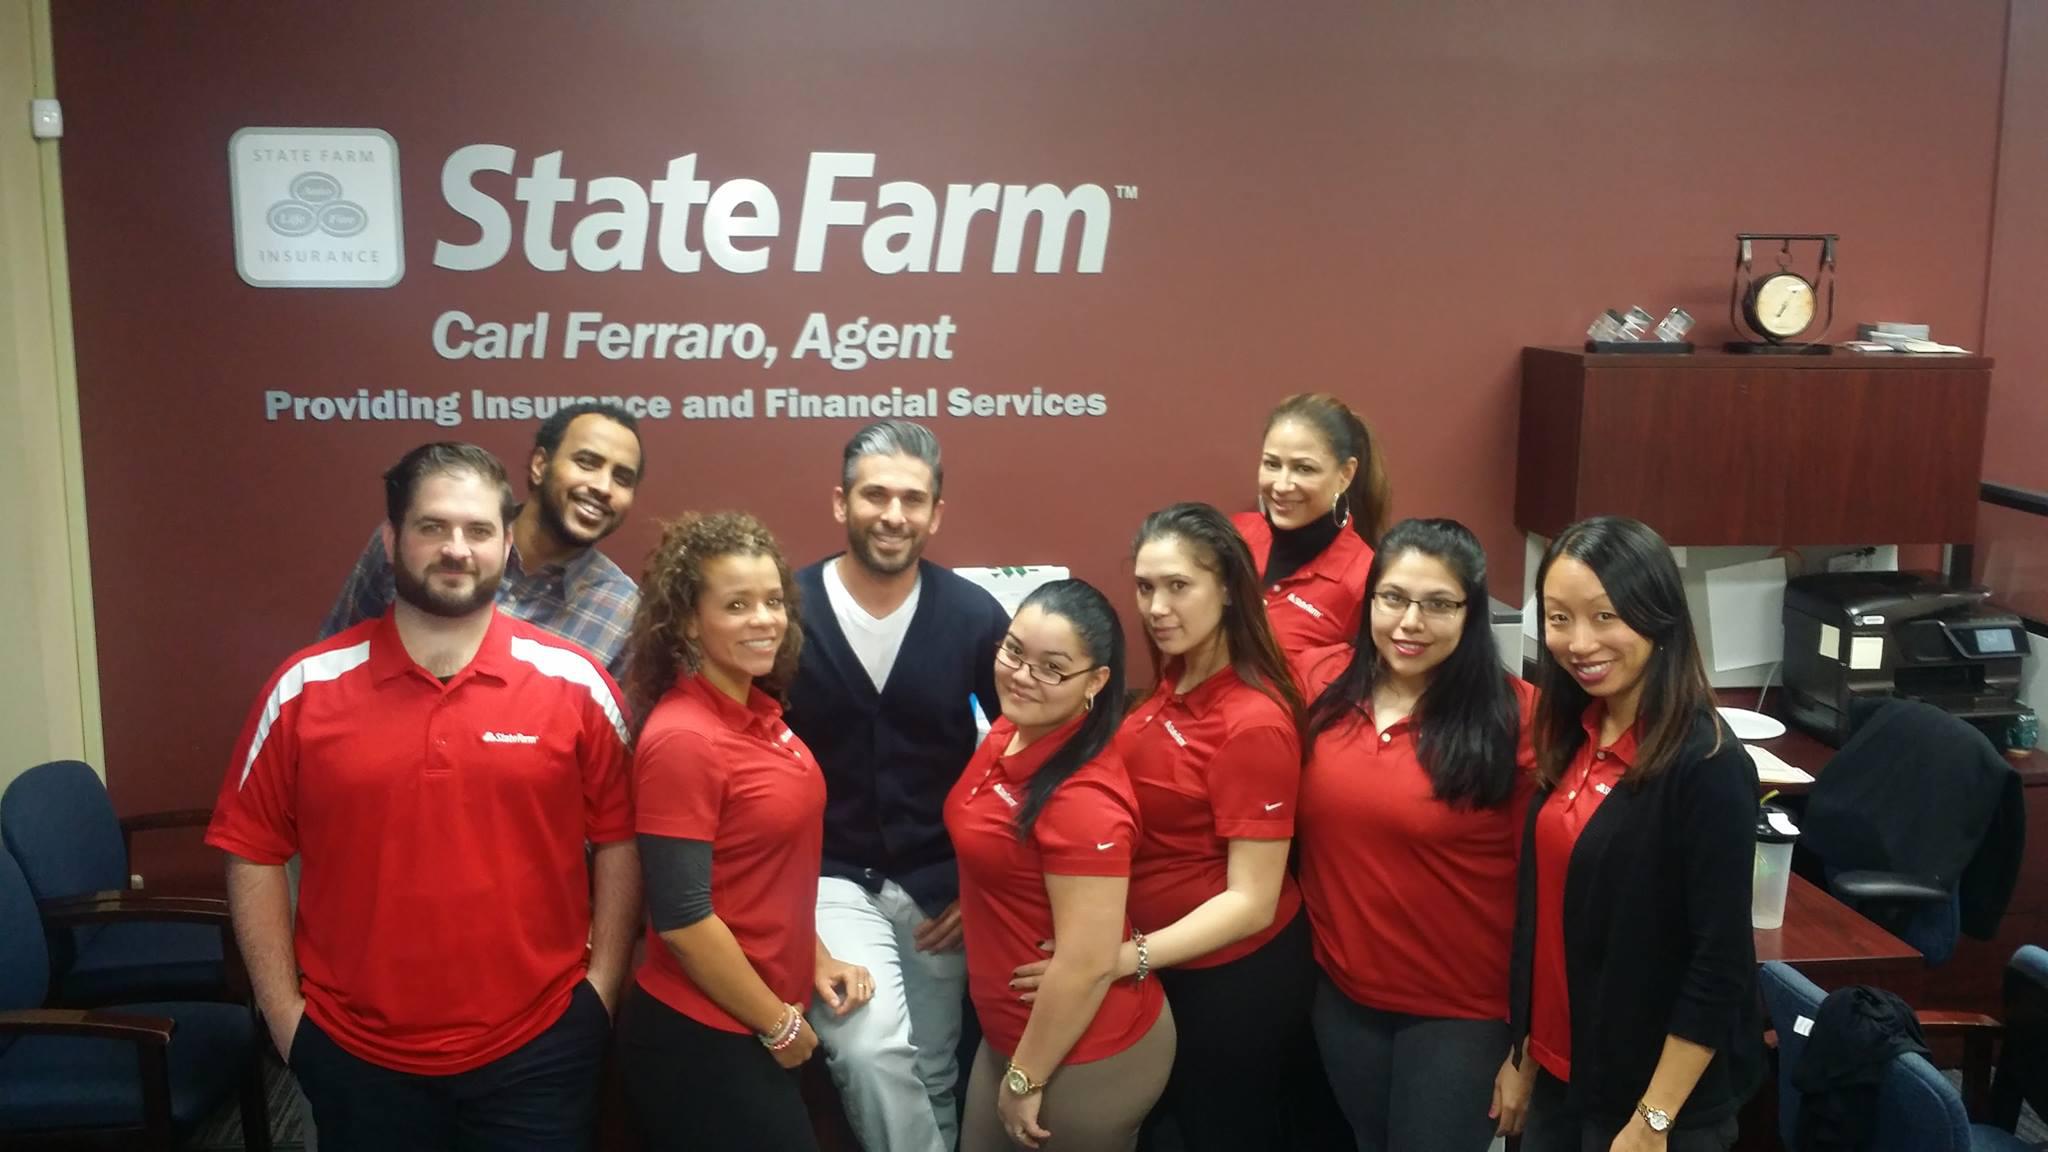 My team and I would love to help you with all of your insurance needs! Give us a call today!